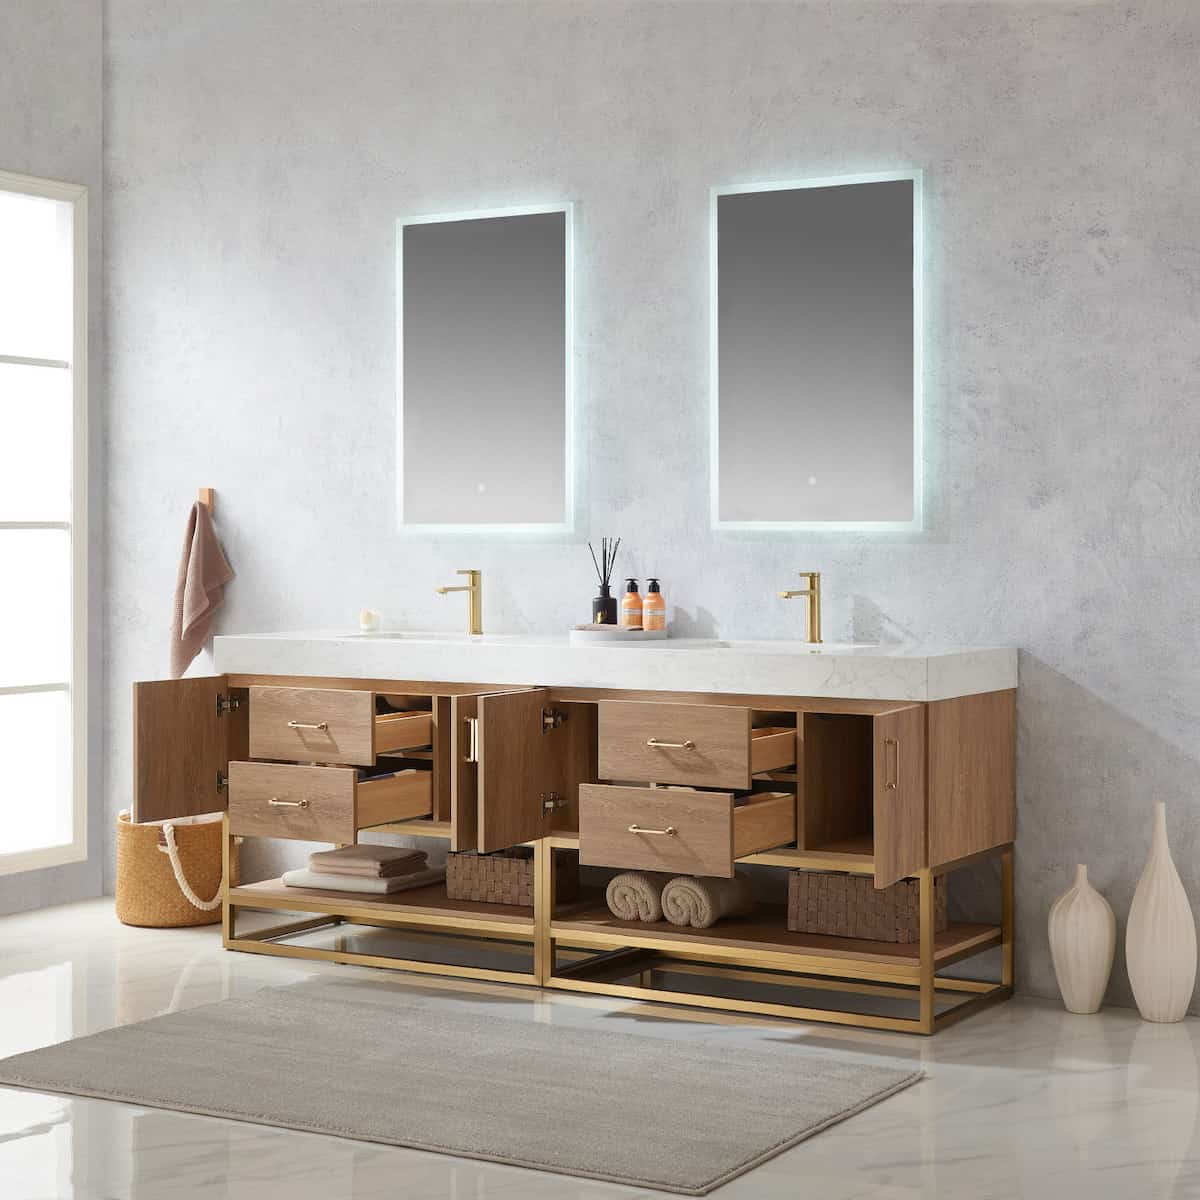 Vinnova Alistair 84 Inch Freestanding Double Vanity in North American Oak and Brushed Gold Frame with White Grain Stone Countertop With Mirrors Inside 789084-NO-GW